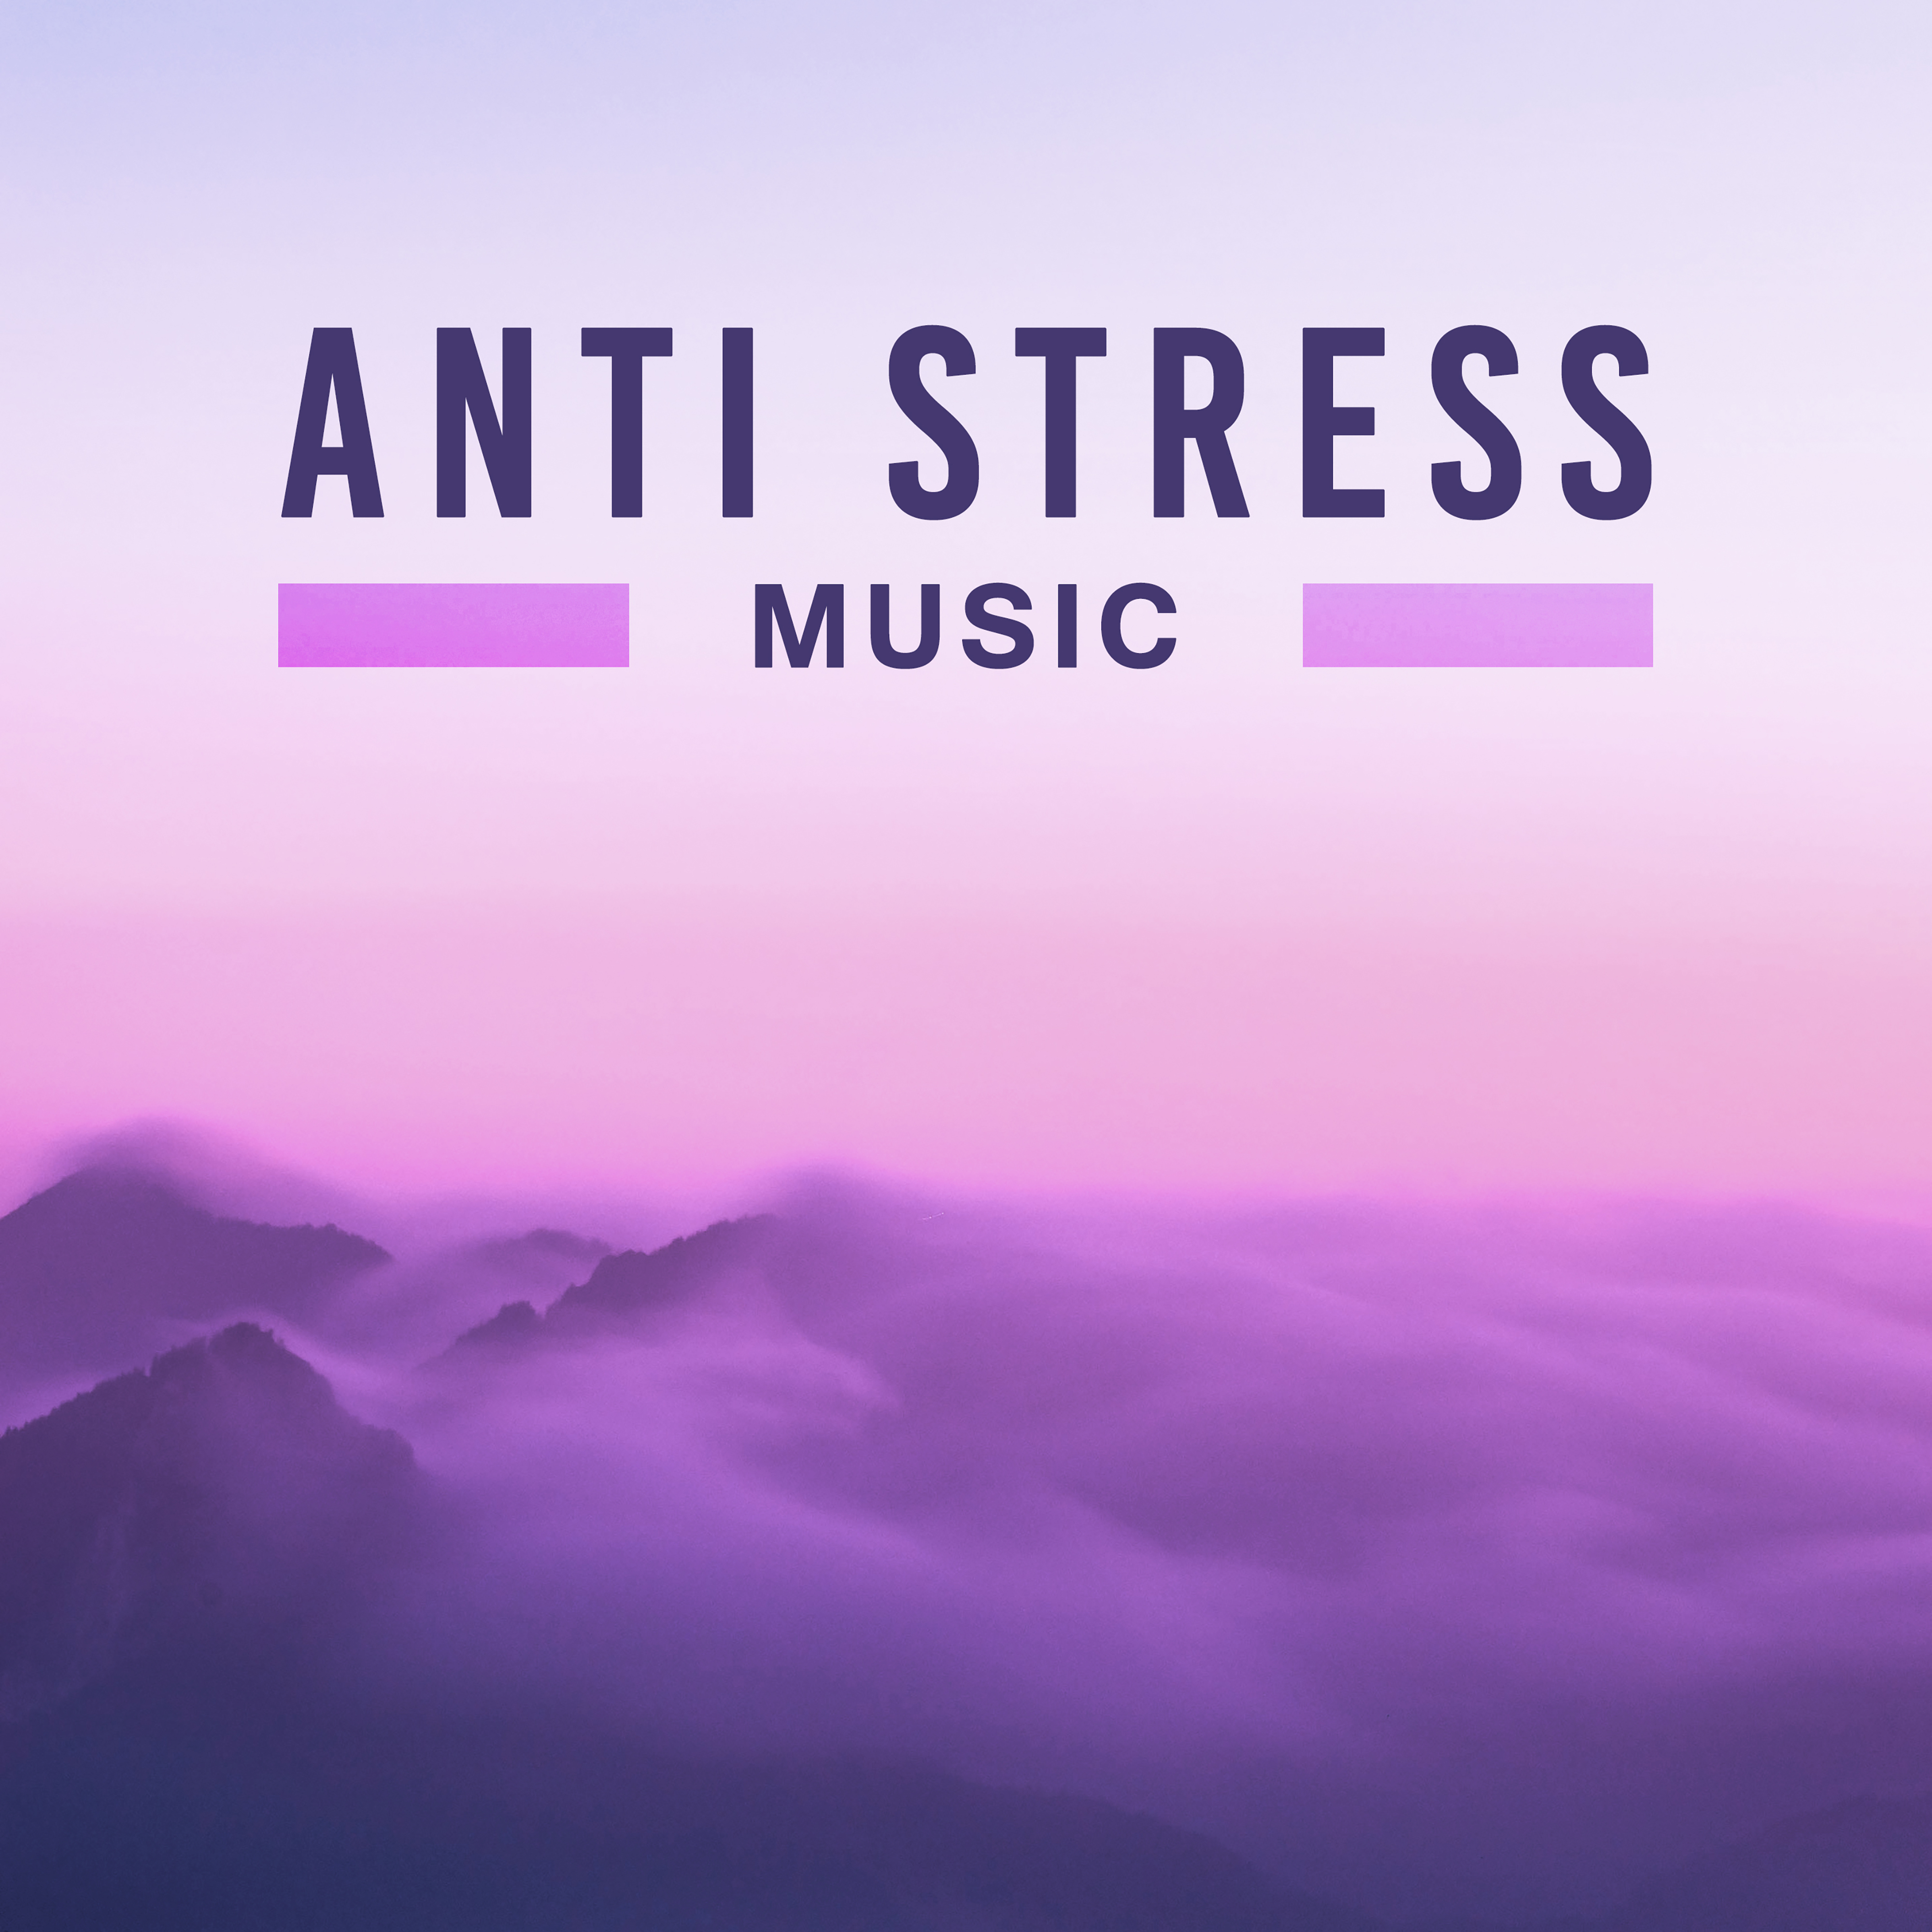 Anti Stress Music  Nature Sounds for Relaxation, Ocean Dreams, Relief, Calming Melodies to Rest, Singing Birds, Relaxing Waves for Sleep